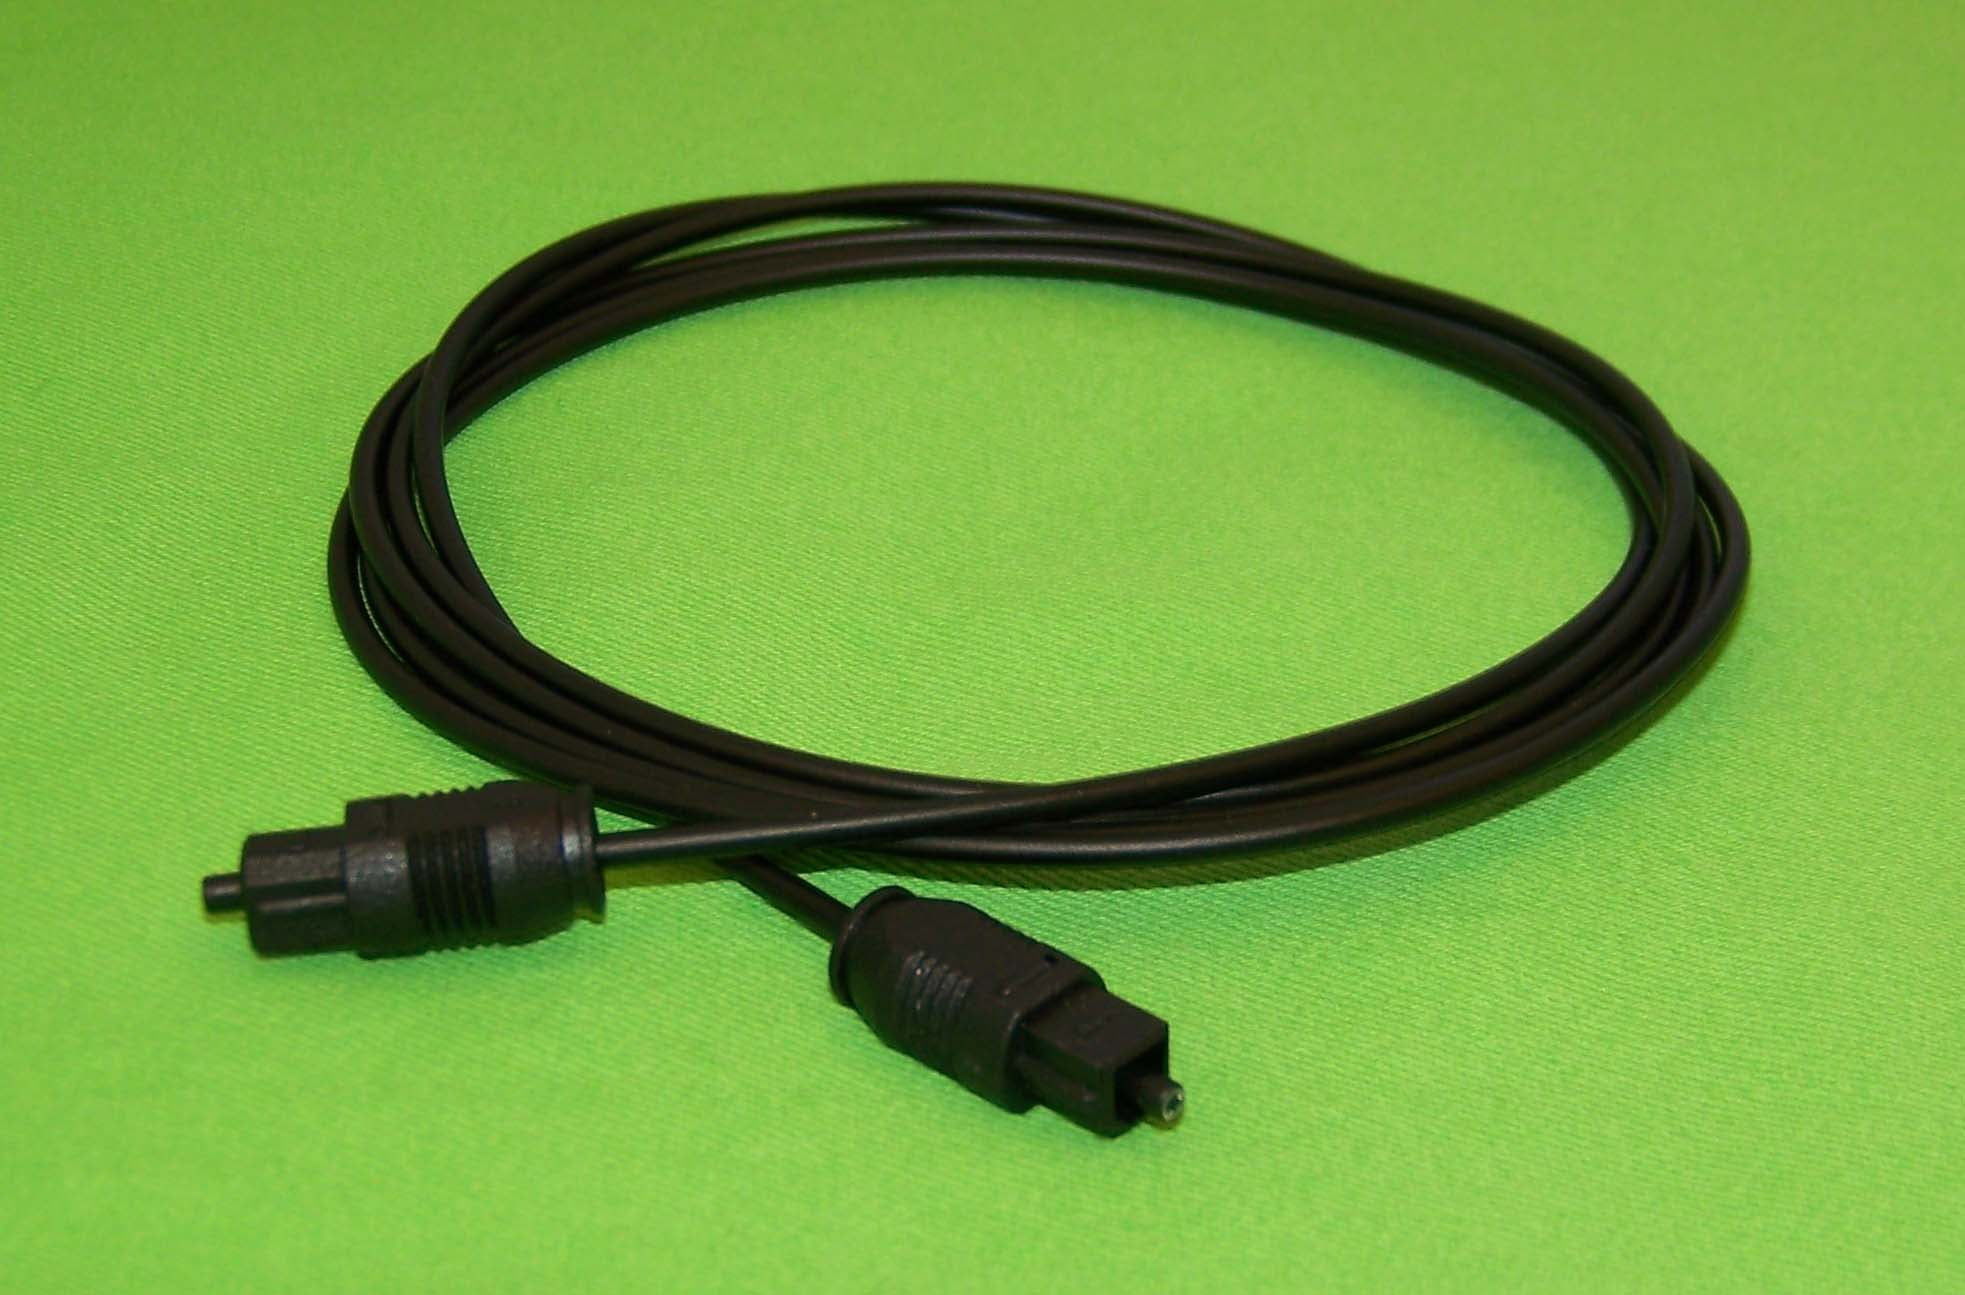 SACT180 HTCT80 SA-CT180 HT-CT180 HTCT180 OEM Sony Optical Cord Cable Originally Shipped With HT-CT80 